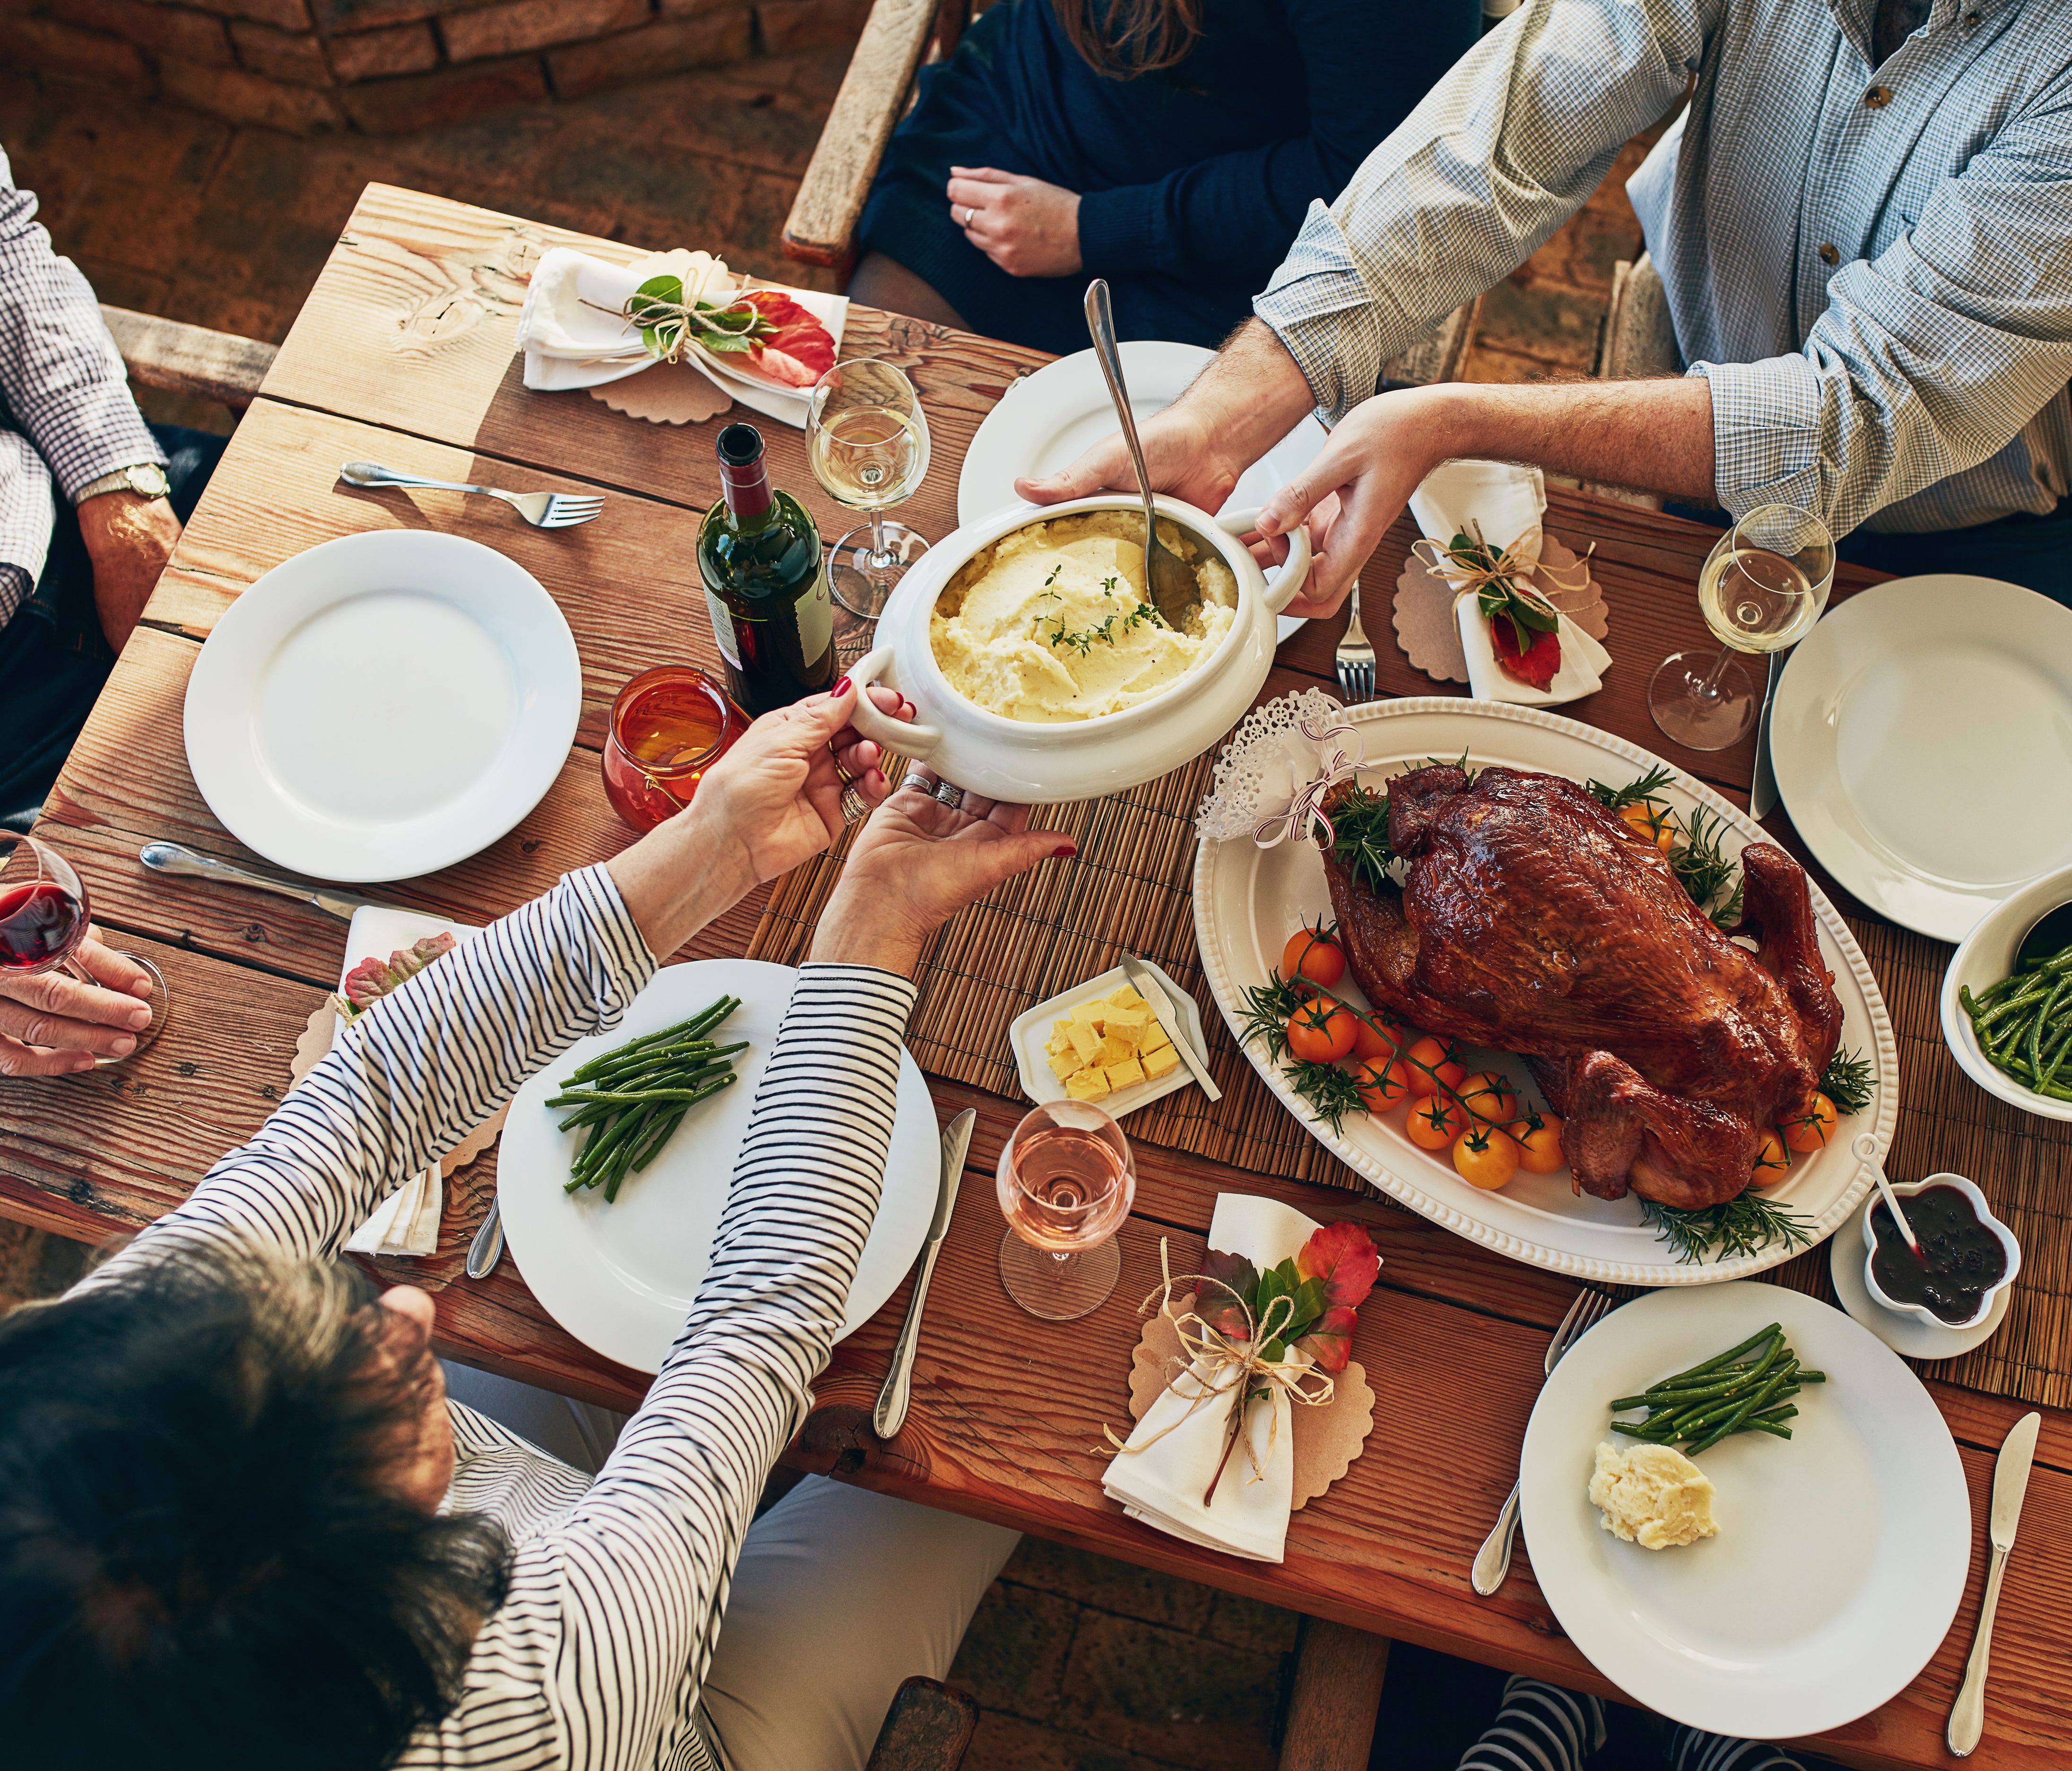 Several Las Cruces restaurants will serve Thanksgiving meals this year.